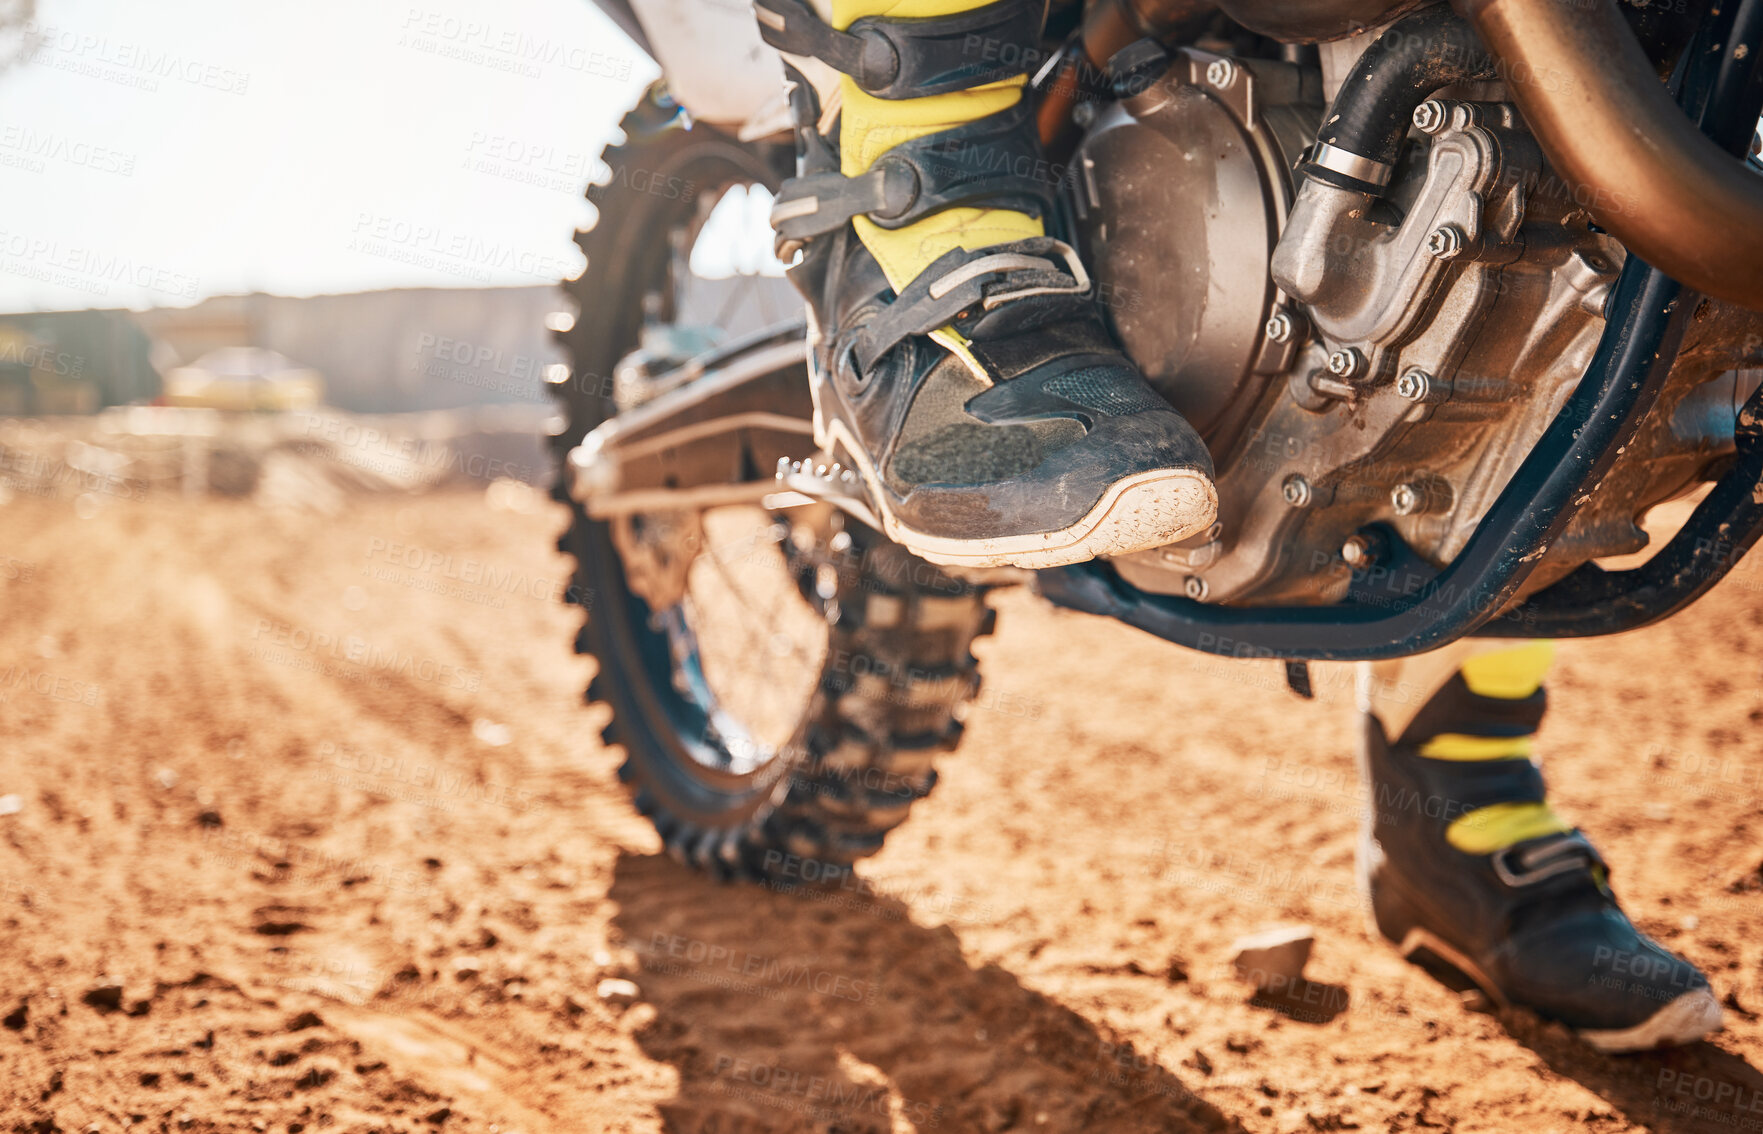 Buy stock photo Dirt road, competition and man feet on motorcycle in desert for exercise, training or rally. Offroad, fitness and male athlete or biker riding on motorbike for action, adventure and extreme sports.